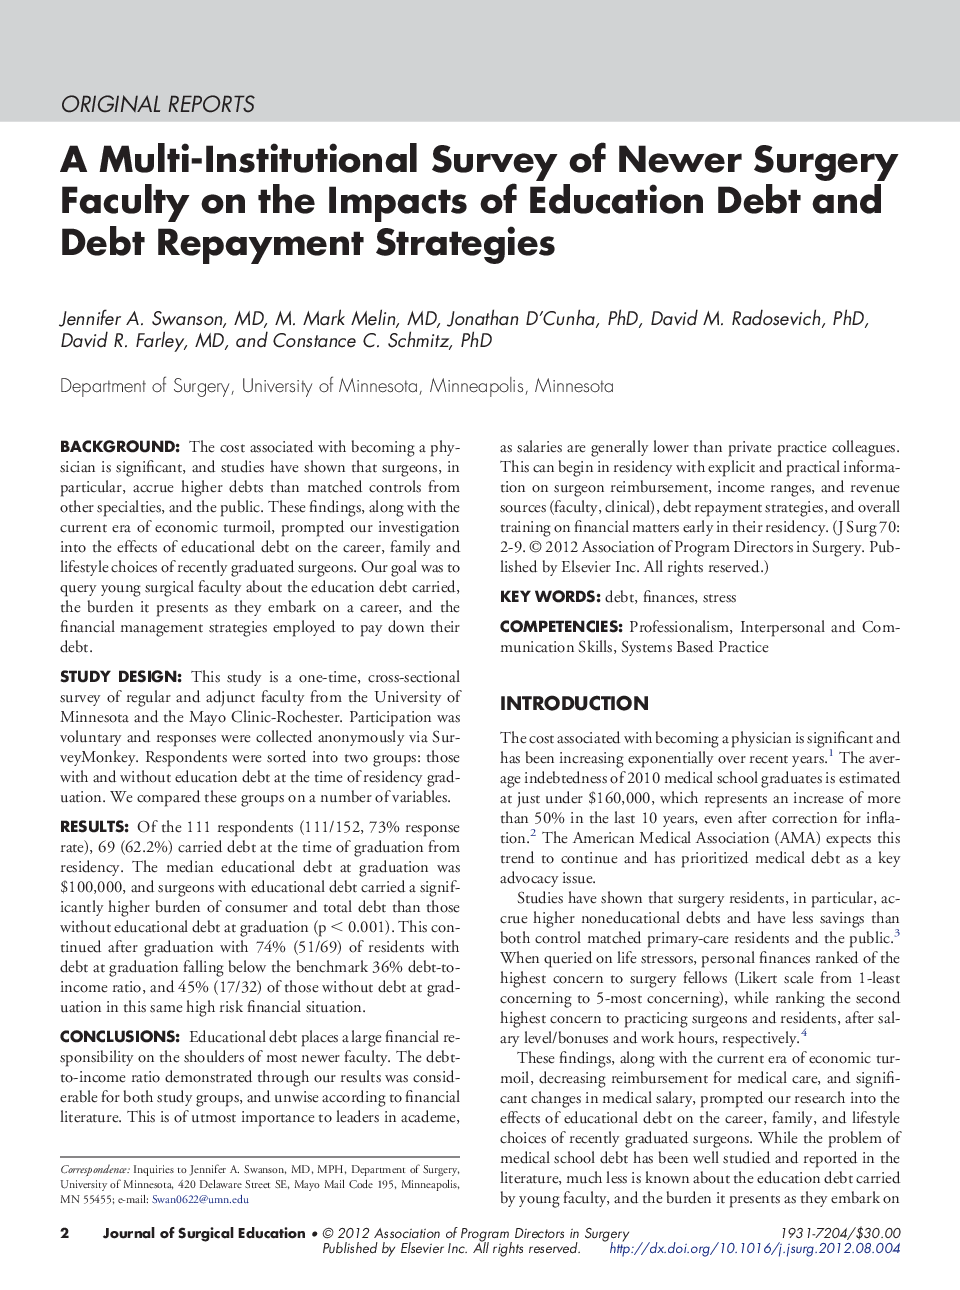 A Multi-Institutional Survey of Newer Surgery Faculty on the Impacts of Education Debt and Debt Repayment Strategies